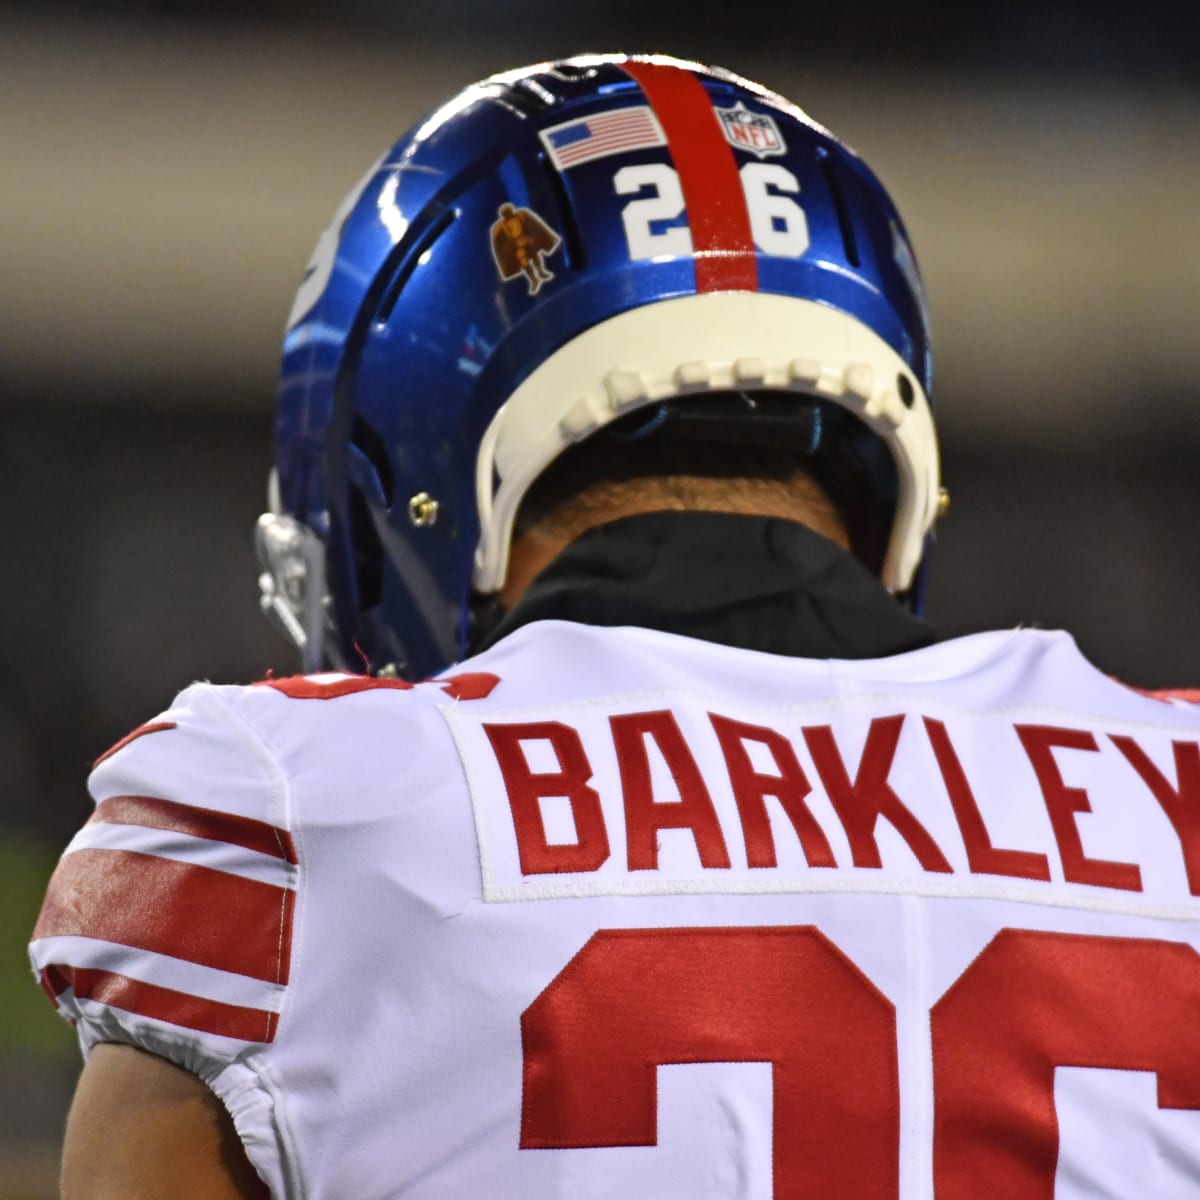 Saquon Barkley gives update on long-term future at the New York